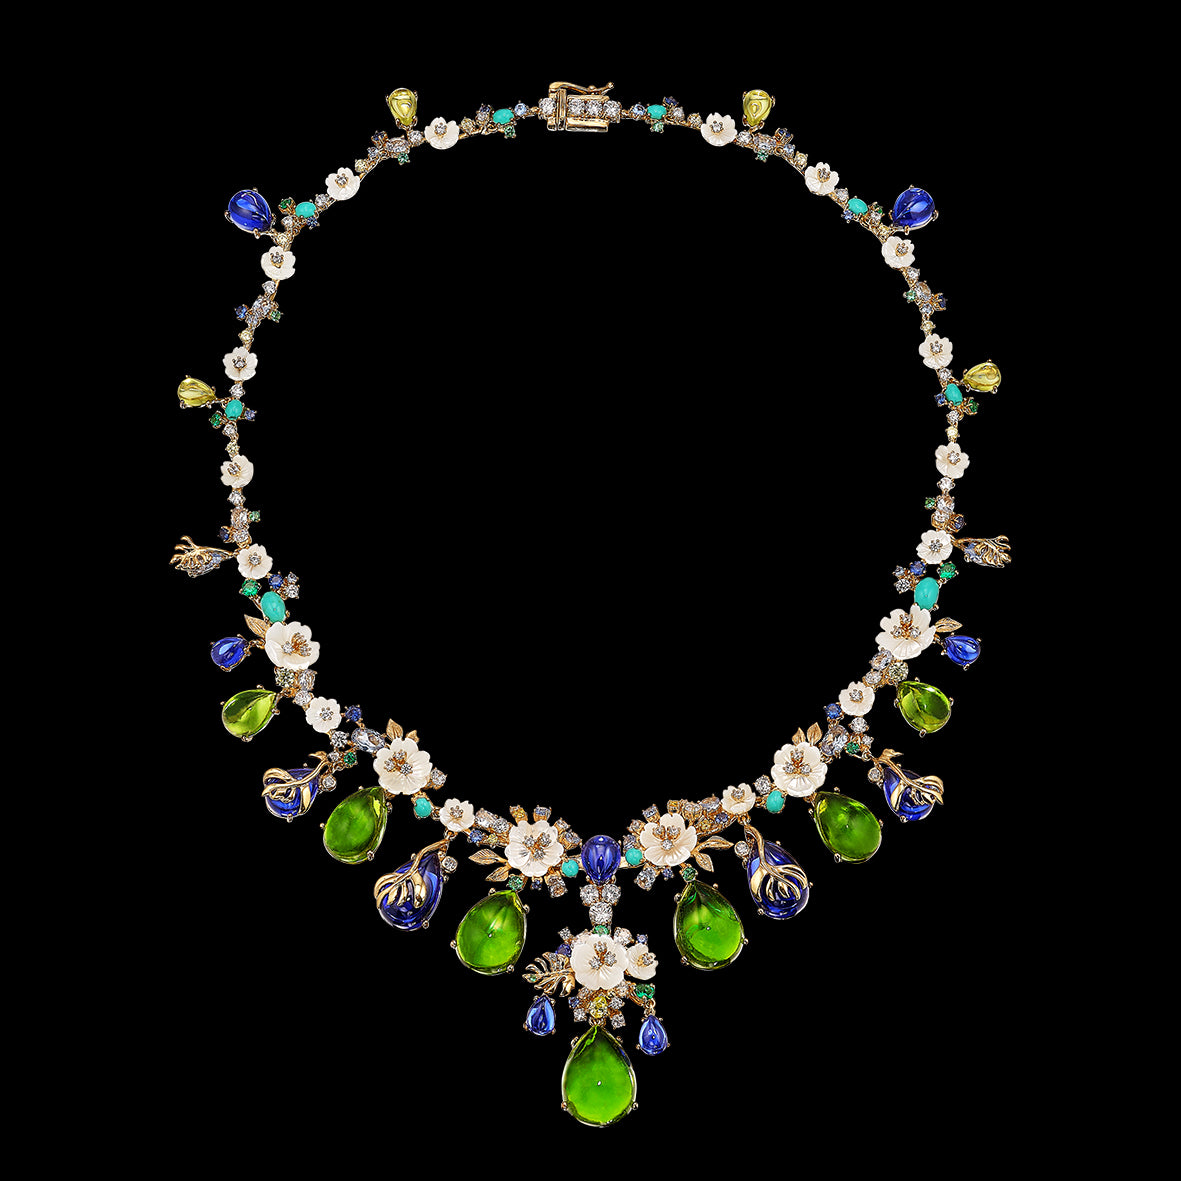 Sapphire Peridot Paradise Necklace, Necklace, Anabela Chan Joaillerie - Fine jewelry with laboratory grown and created gemstones hand-crafted in the United Kingdom. Anabela Chan Joaillerie is the first fine jewellery brand in the world to champion laboratory-grown and created gemstones with high jewellery design, artisanal craftsmanship and a focus on ethical and sustainable innovations.